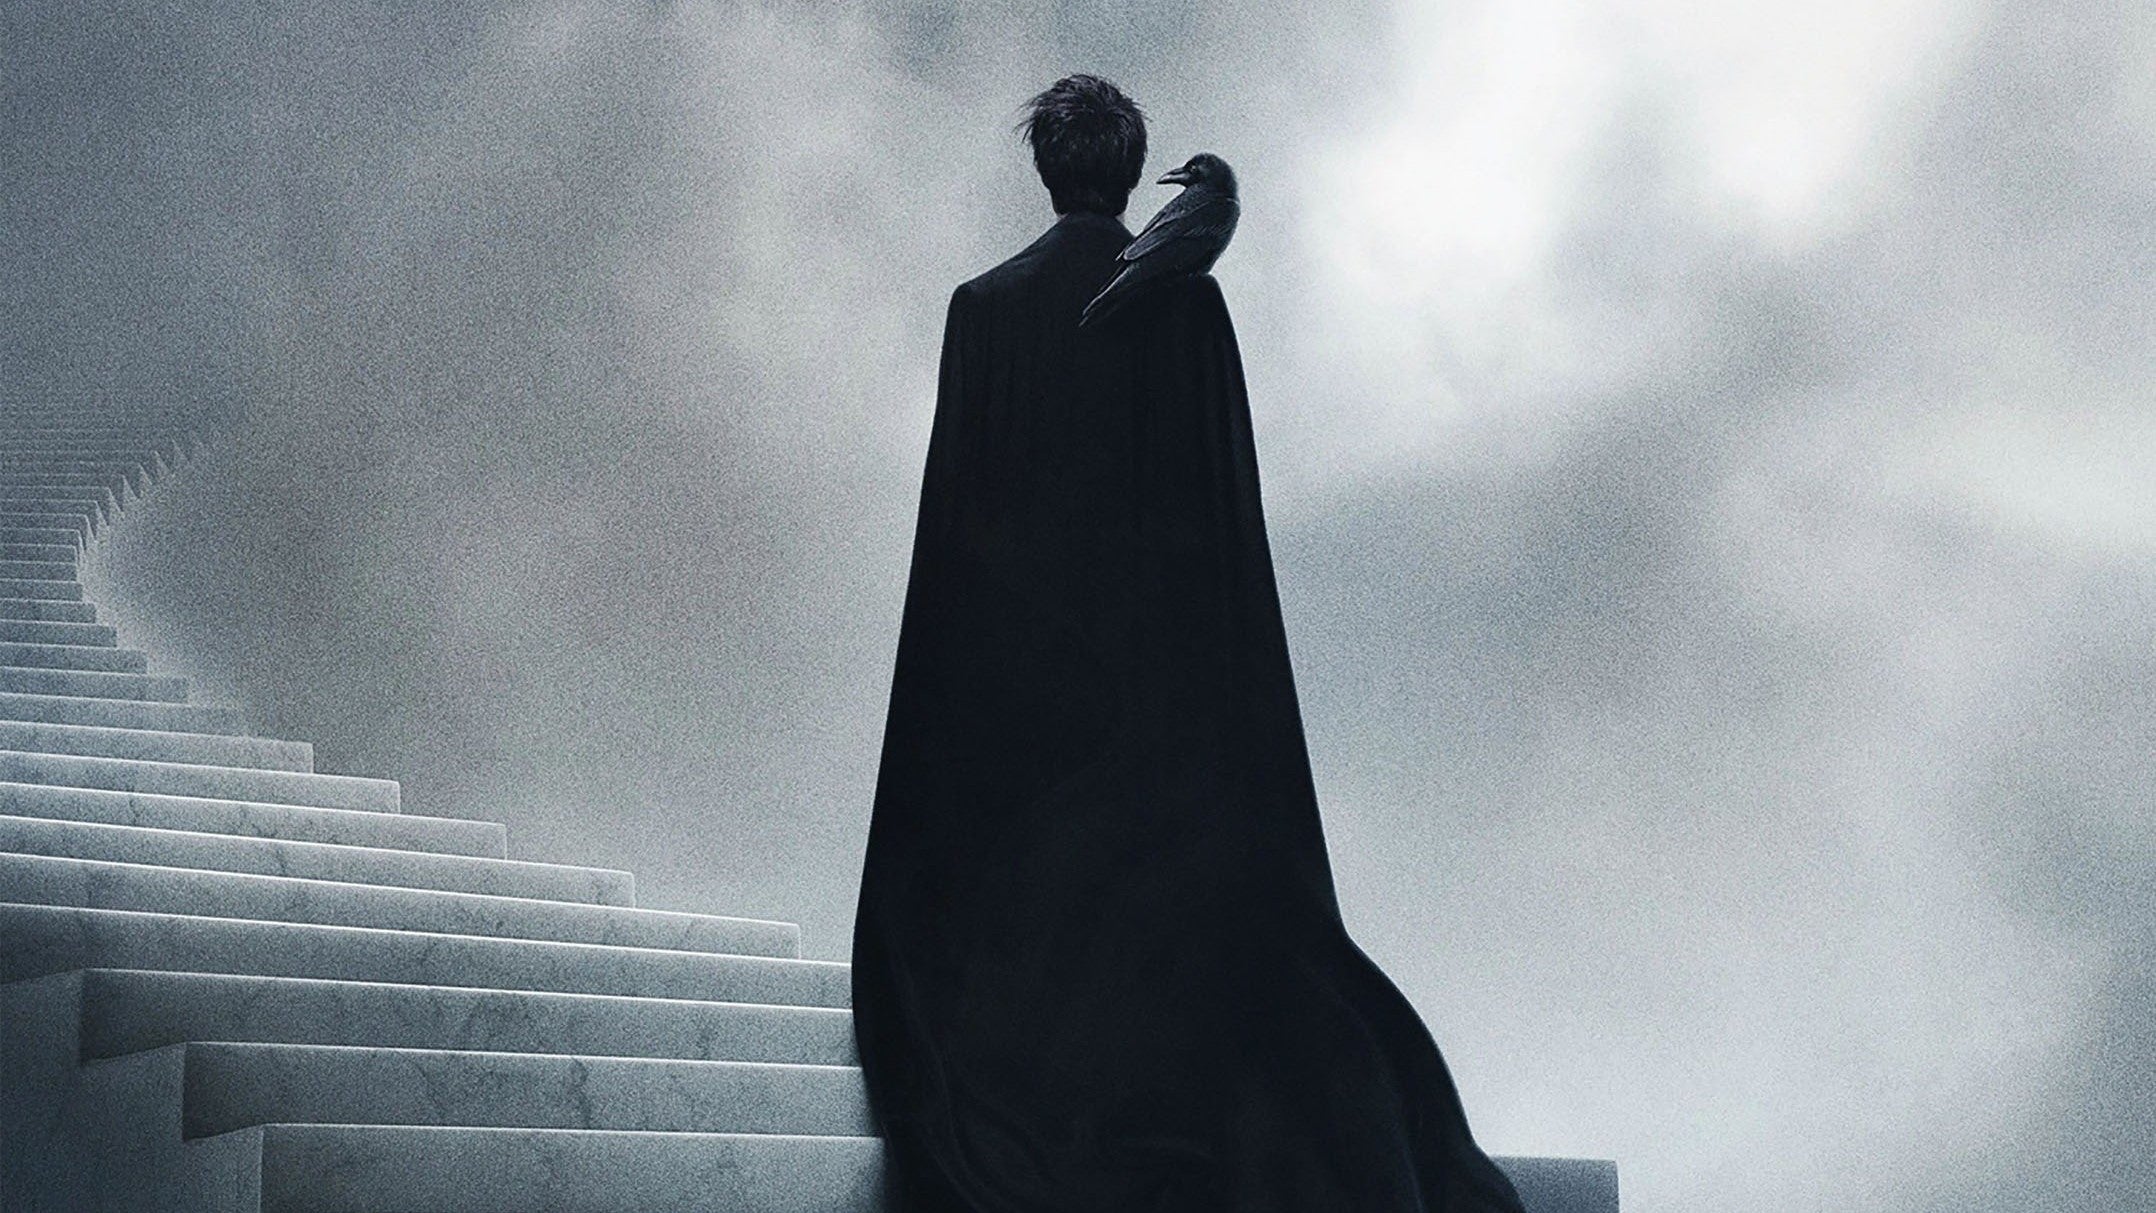 A promotional image for the Netflix Sandman series. The character Dream stands on a staircase that spirals into the clouds, back turned, with a raven on his shoulder. He is dressed, as always, all in black.